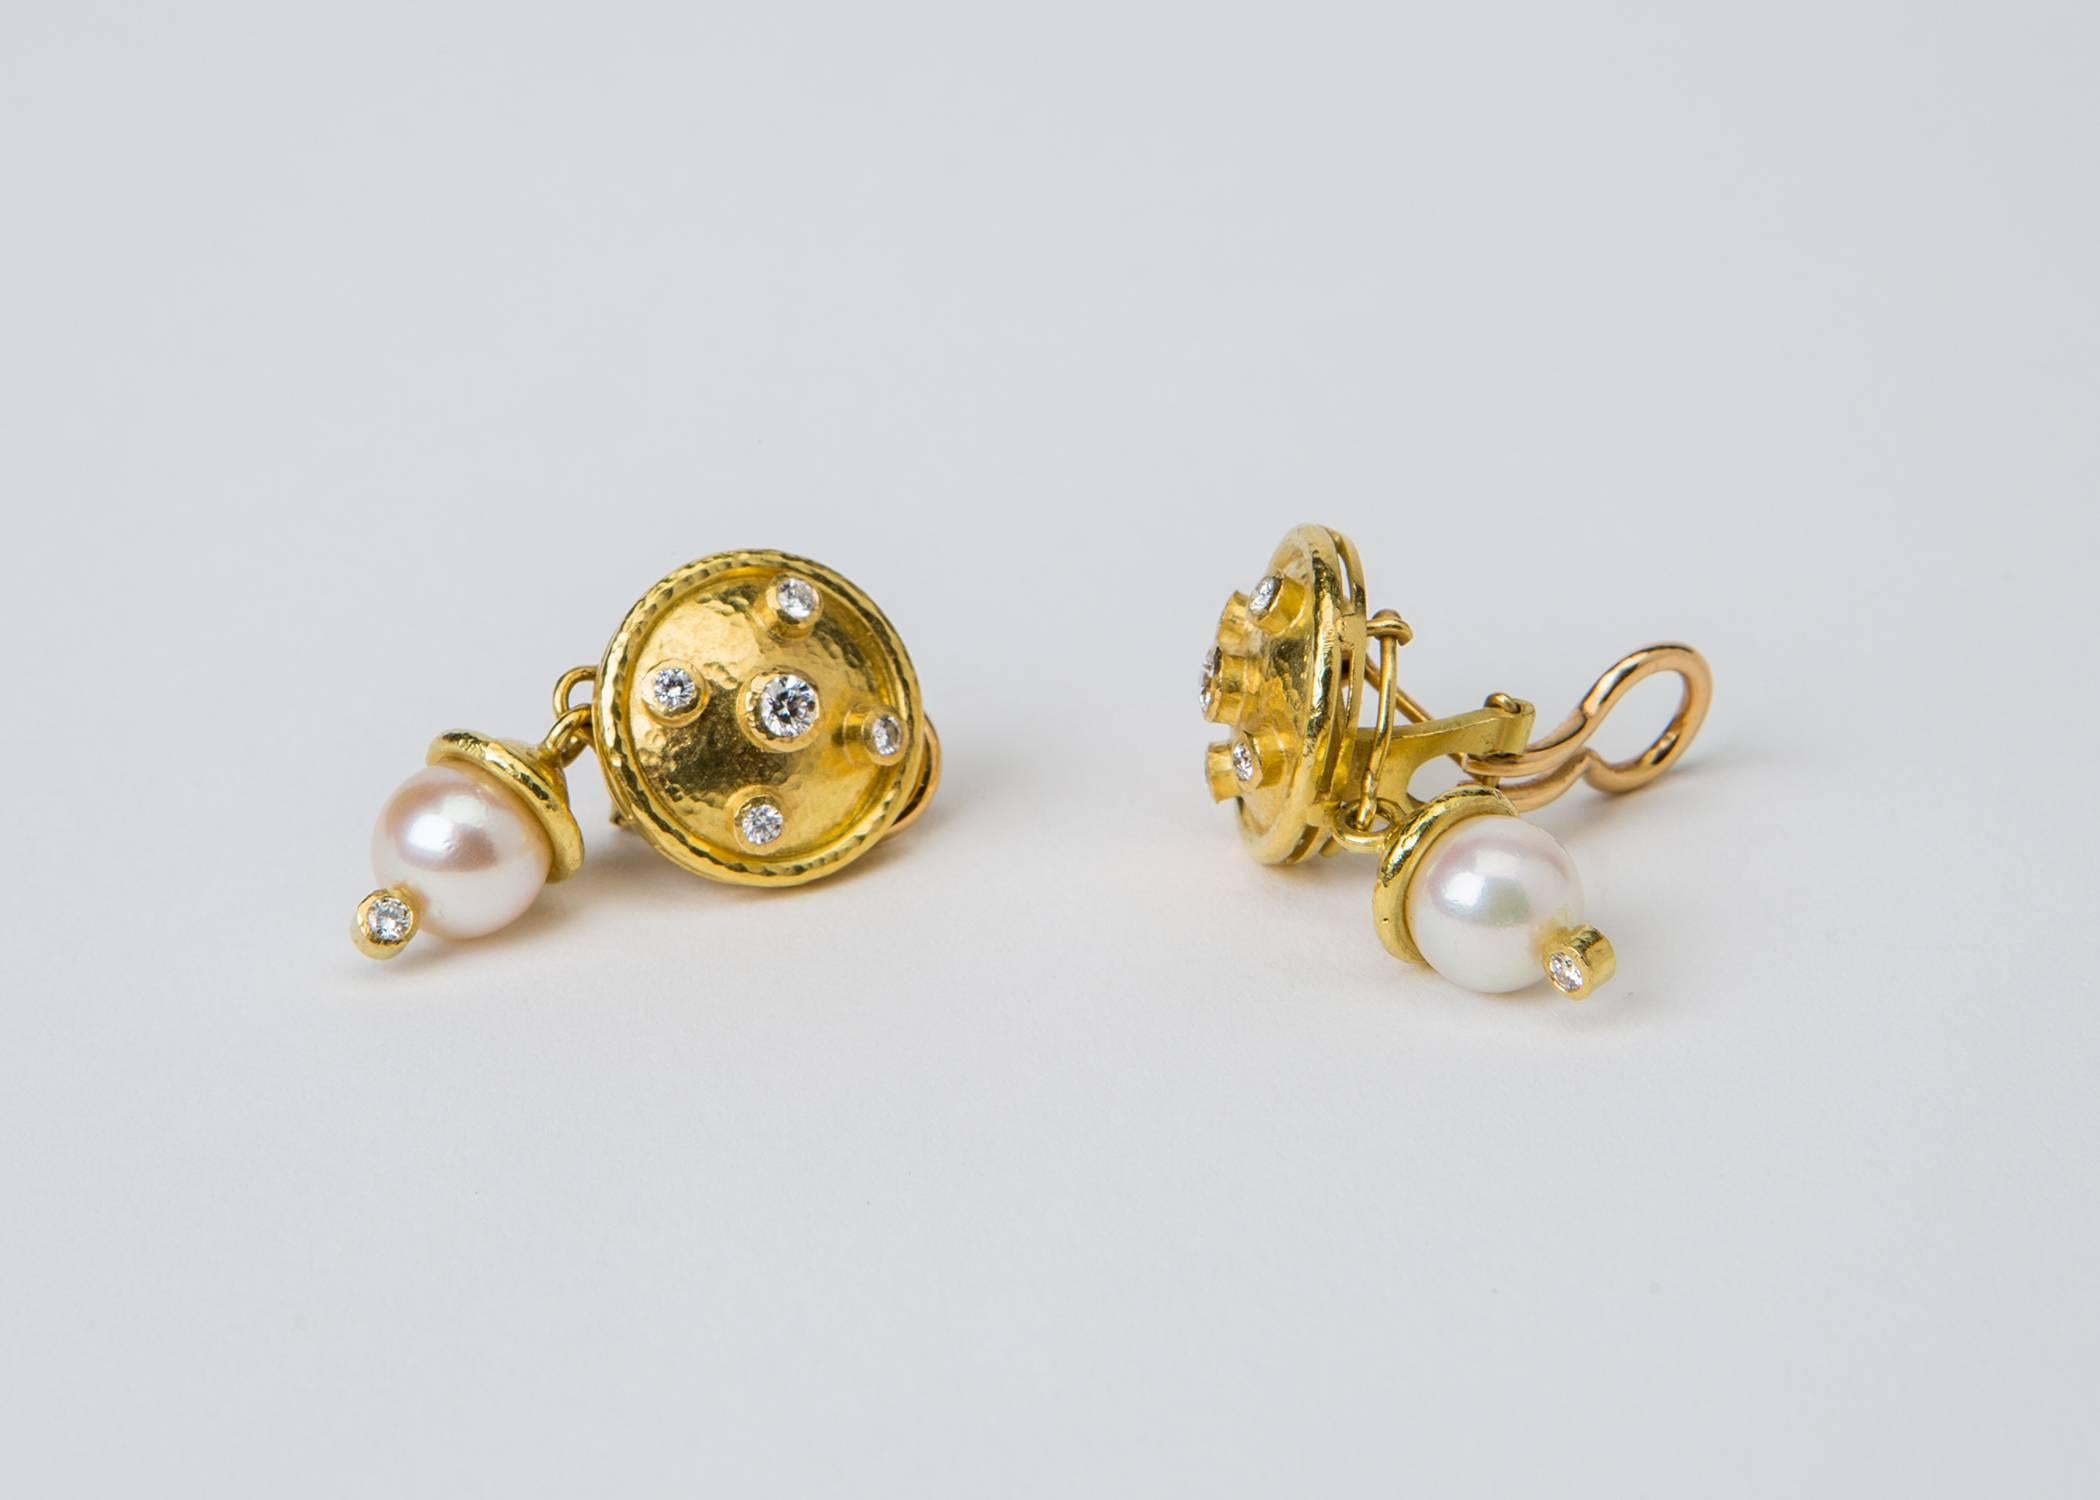 Less is more ! Elizabeth Locke accents a simple textured gold top with brilliant cut diamonds and finishes it with the beauty of a classic cultured pearl. 1 1/4 inches in length. 